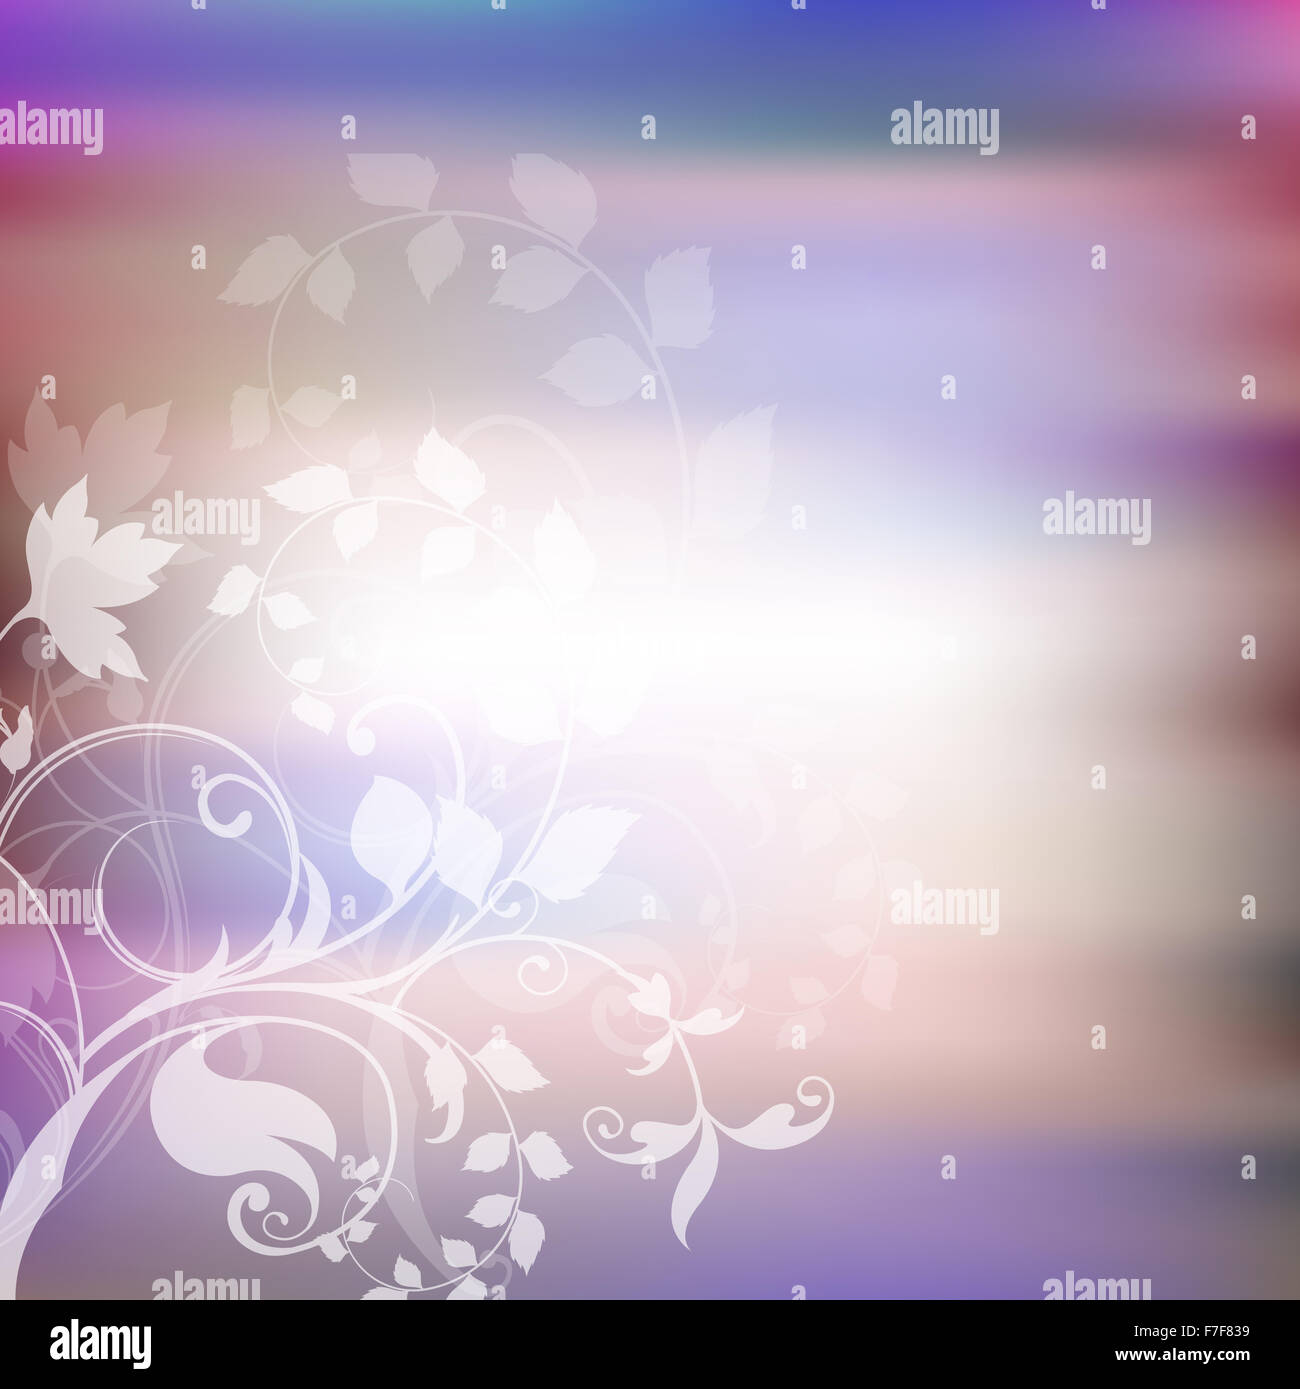 Abstract blur background with a decorative floral design Stock Photo